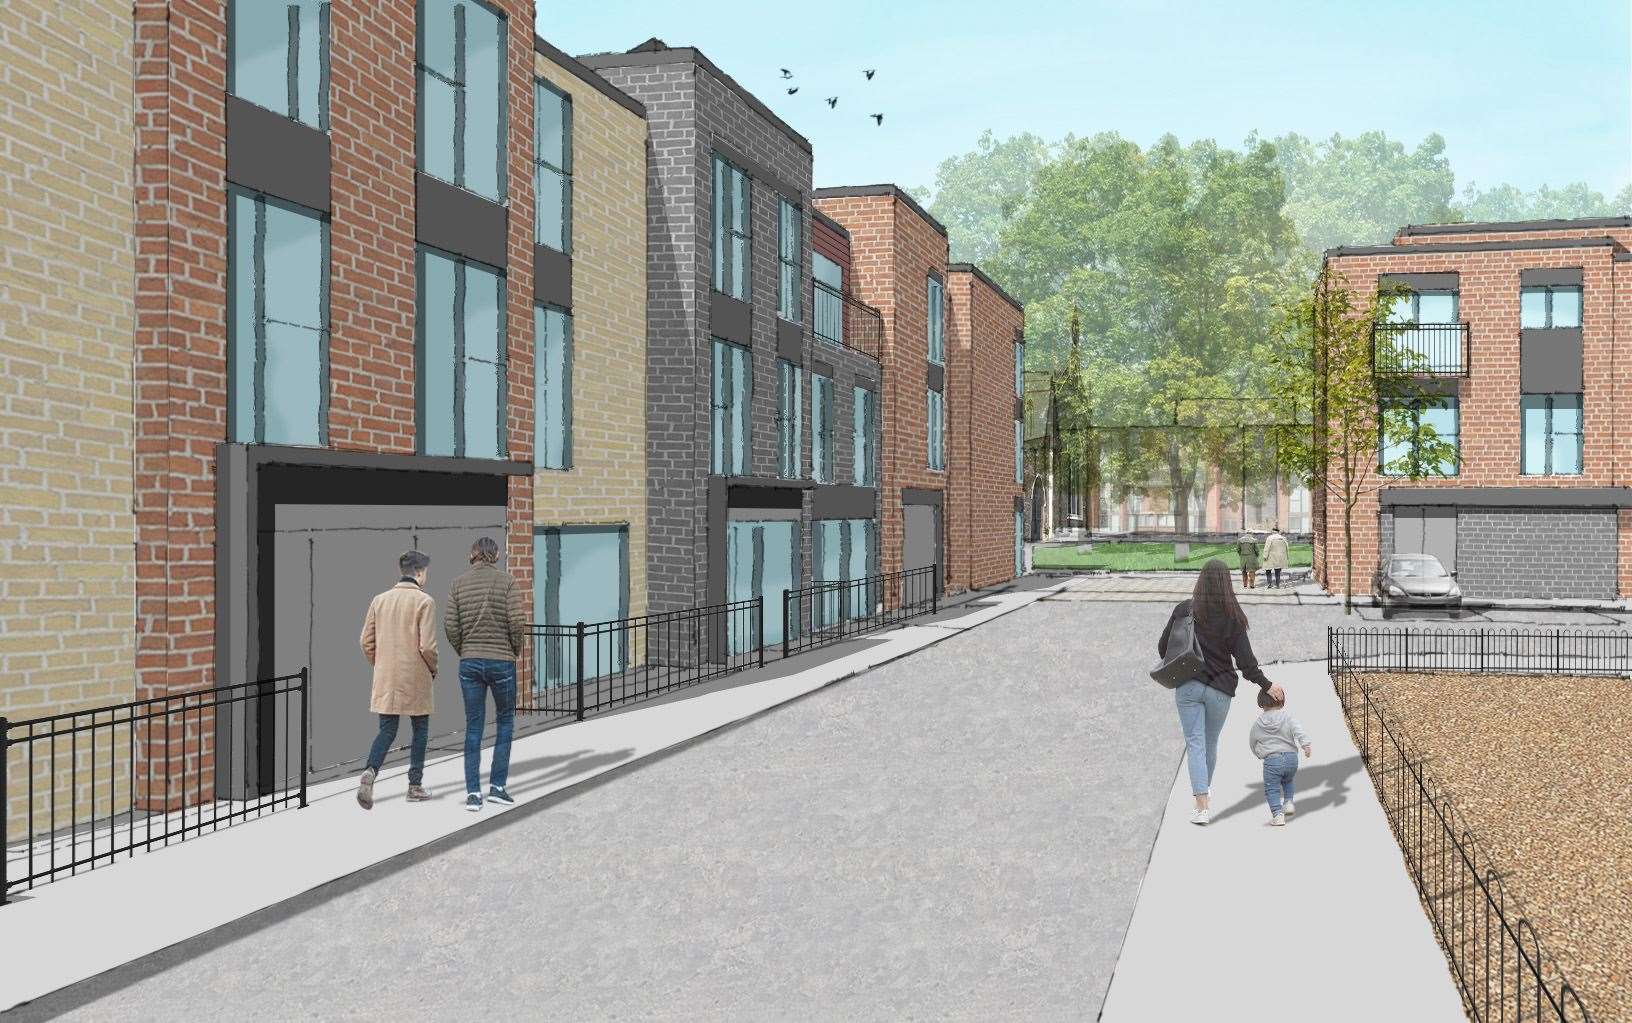 An artist's impression of what the final phase of Hillington Square will look like